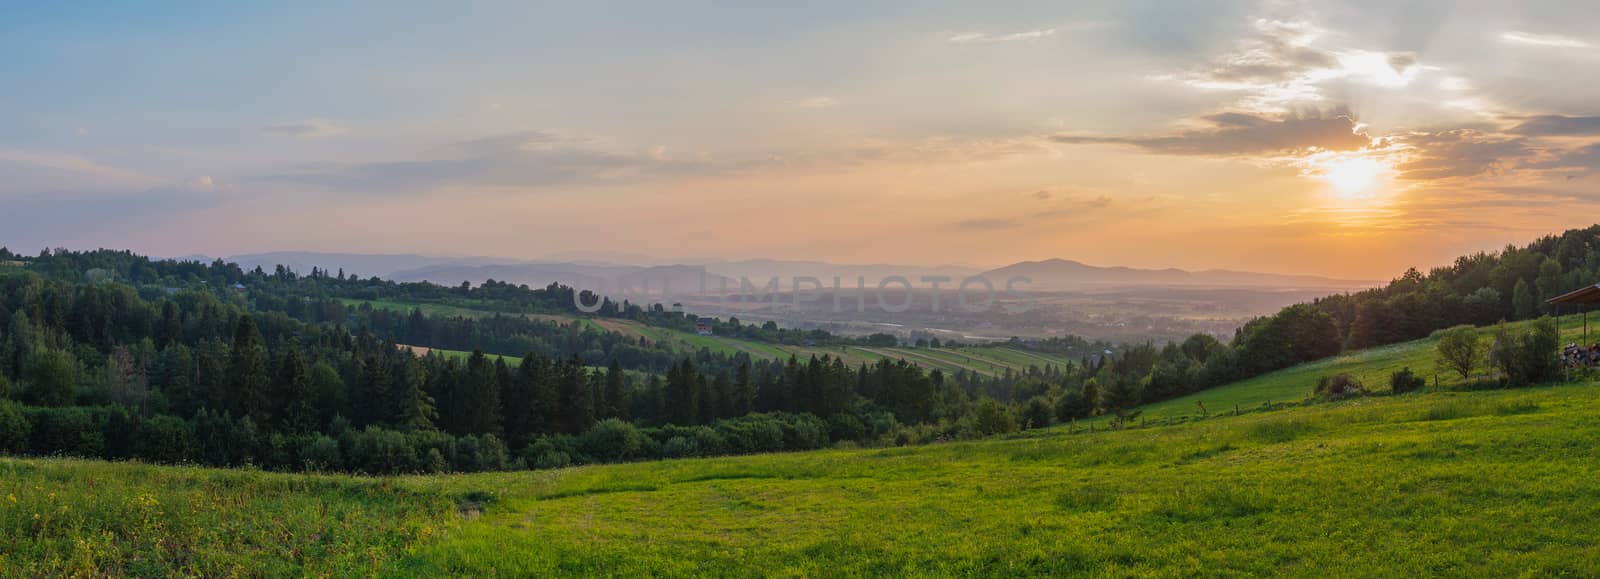 sunset over a panorama of mountain hills and village in the valley by Adamchuk